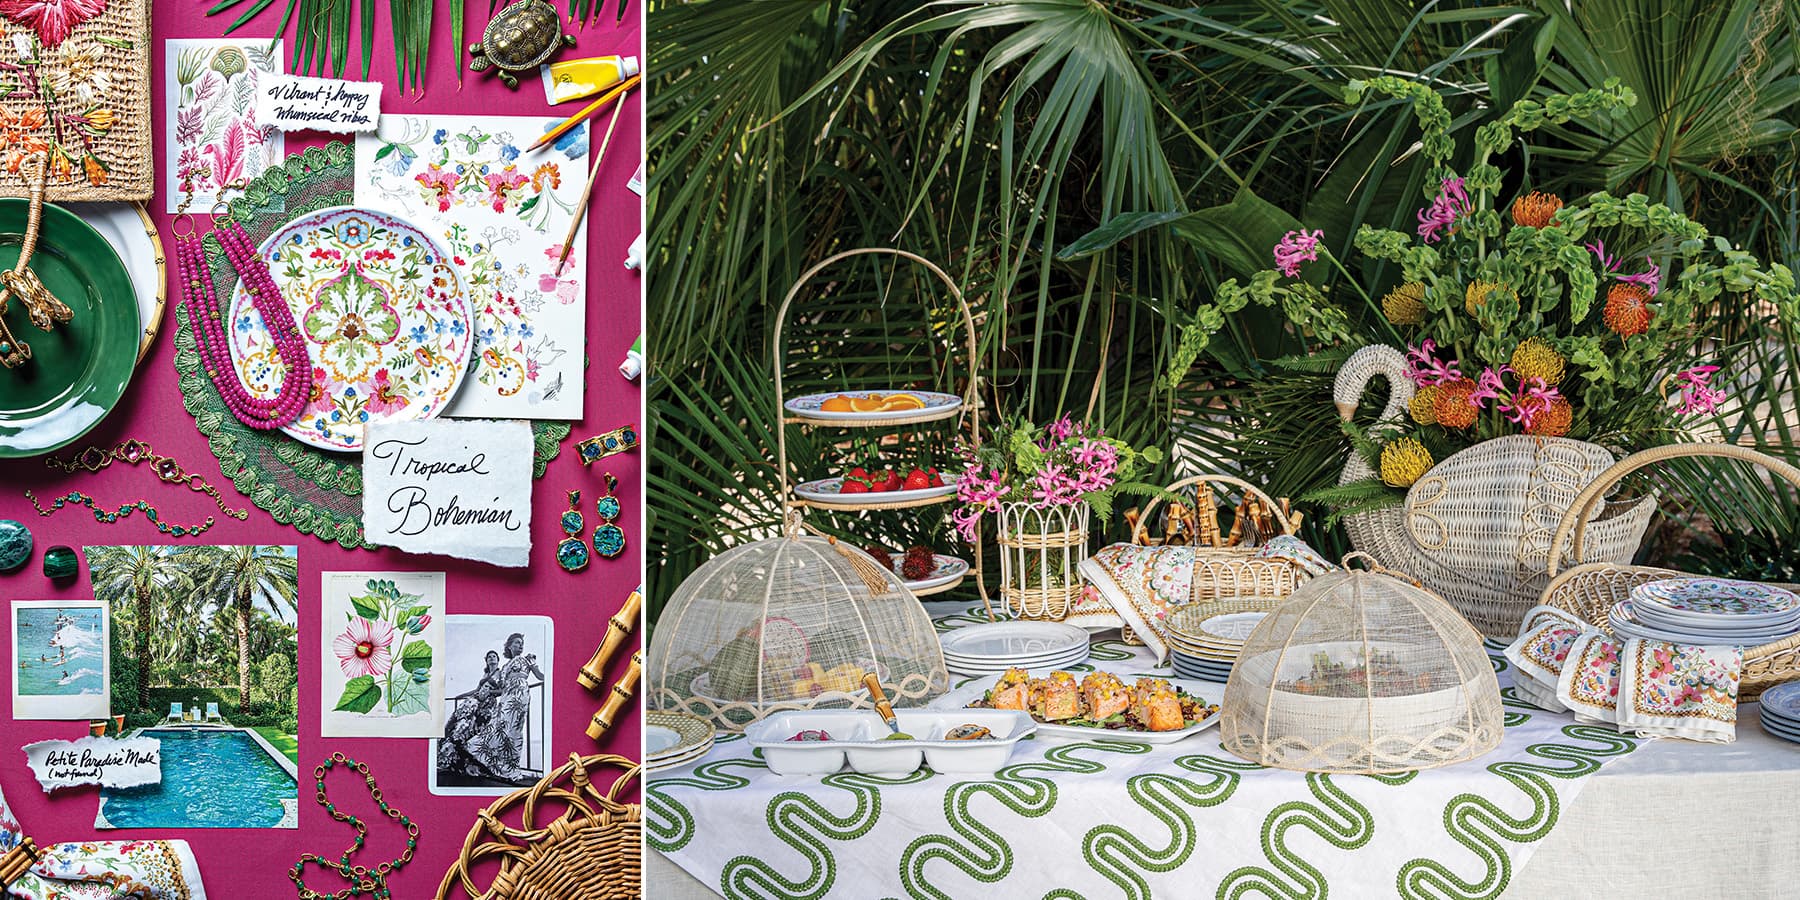 A vibrant and eclectic mix of classic pieces and whimsical accents creates a tropical vibe for your home and garden parties!